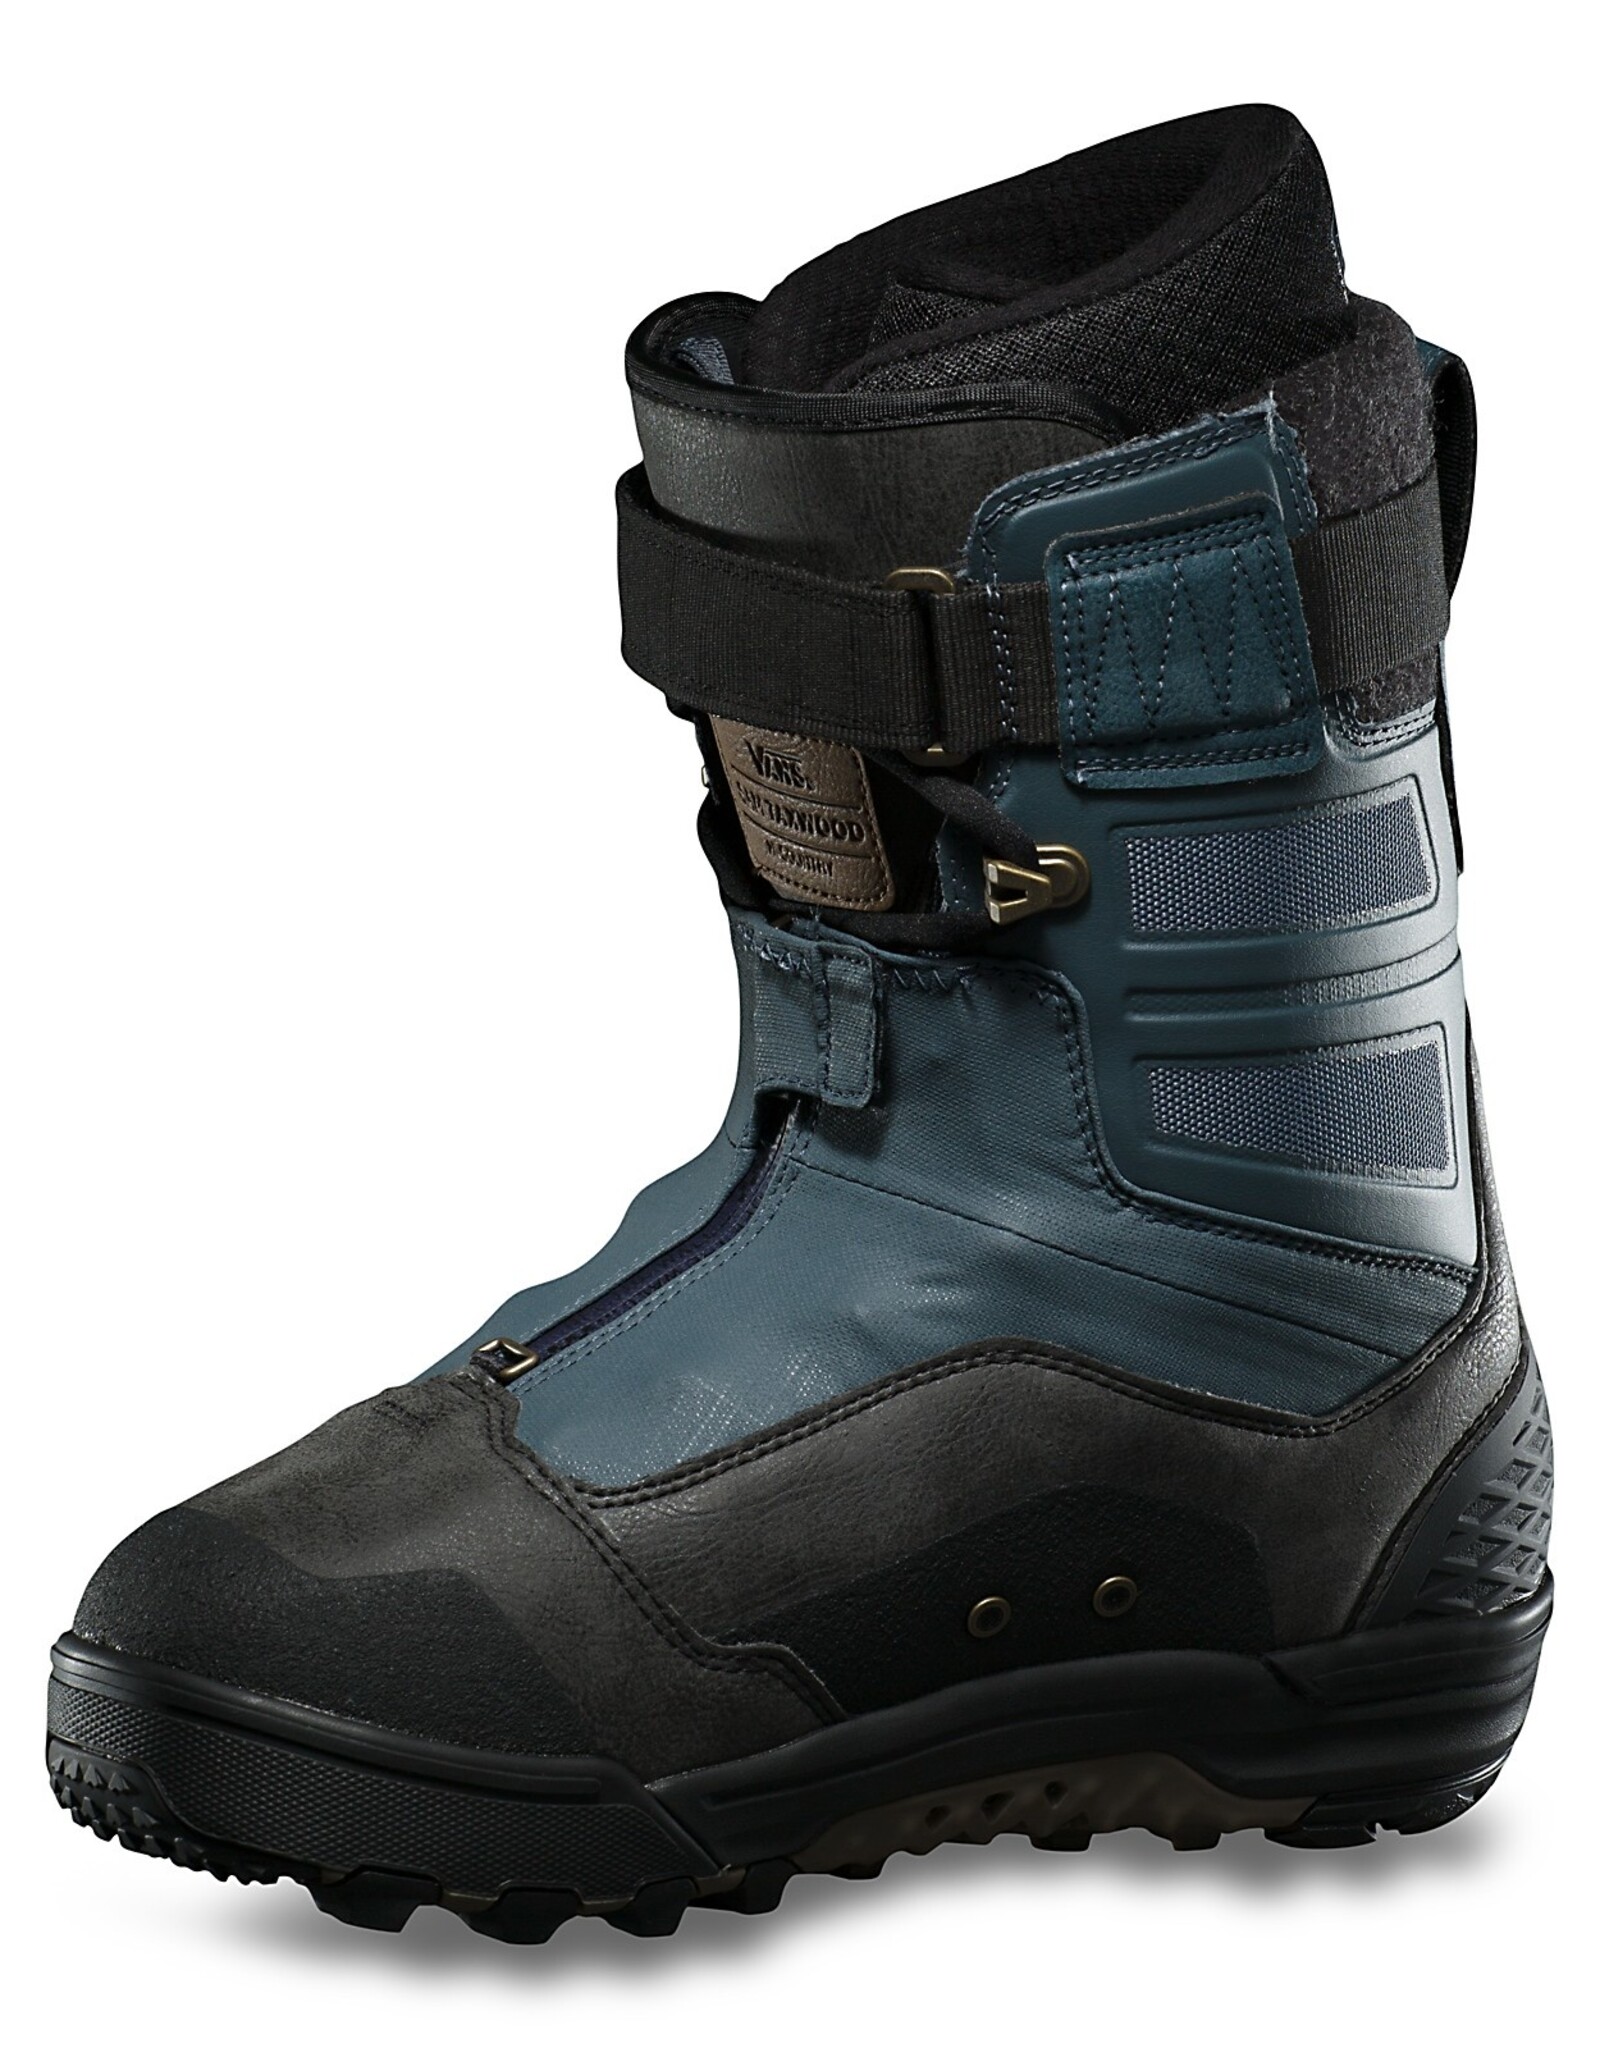 VANS - HI-COUNTRY & HELL BOUND - BLACK/BLUE - SNOWBOARD BOOT 